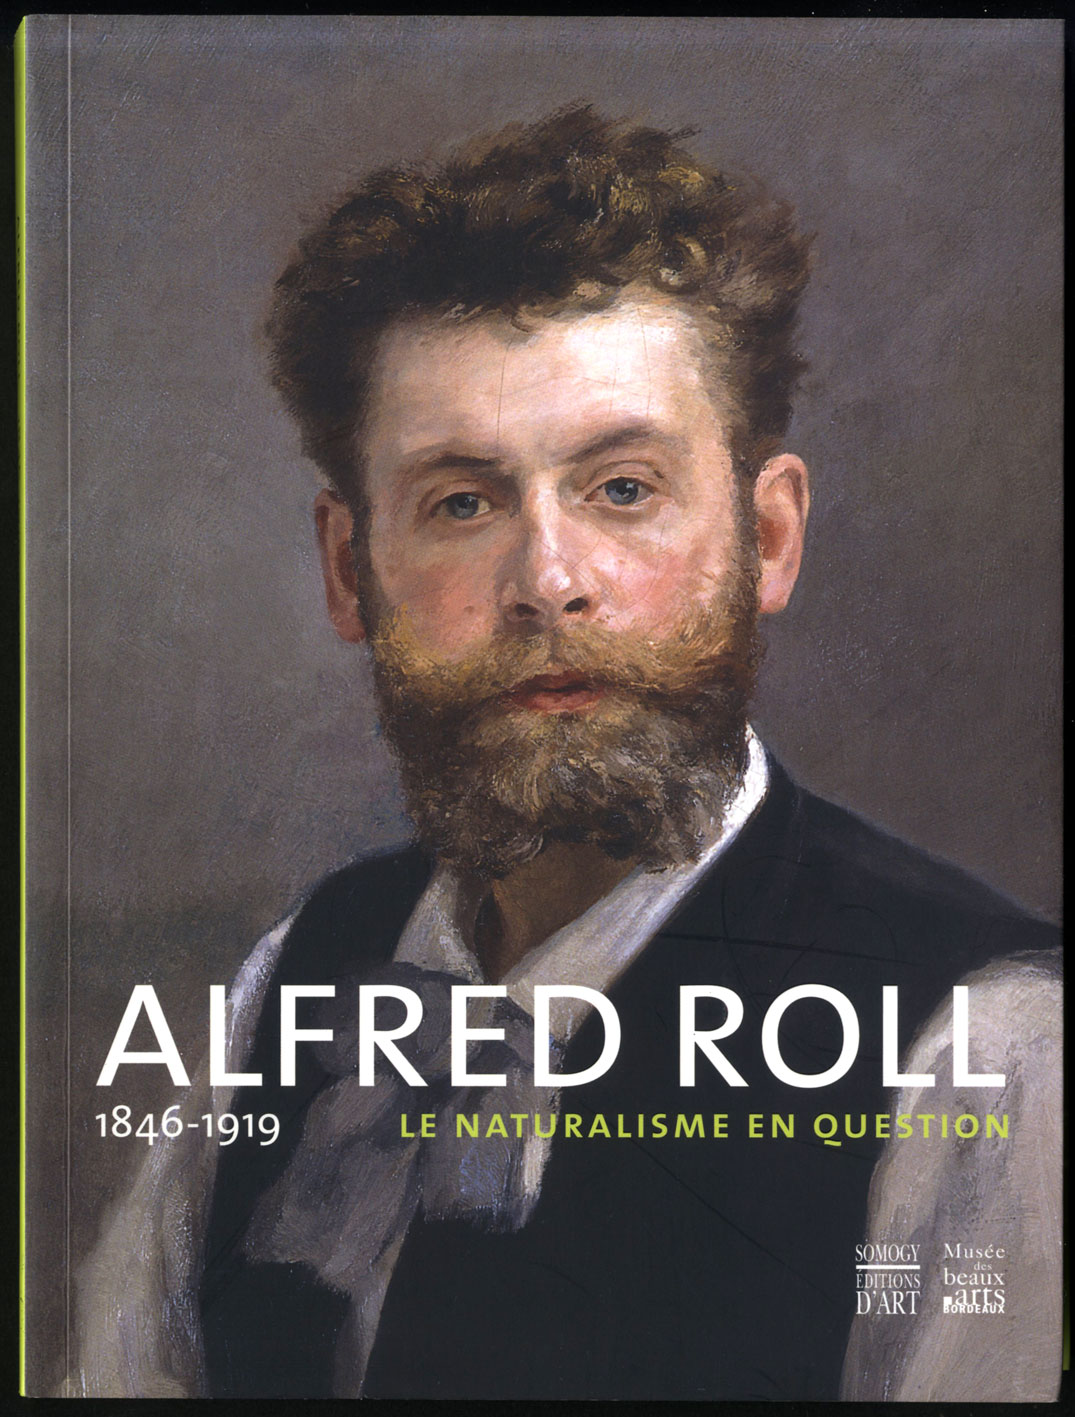 Alfred Roll Alsace Photographe Militaire 1870 Gerome Gandara Manet 